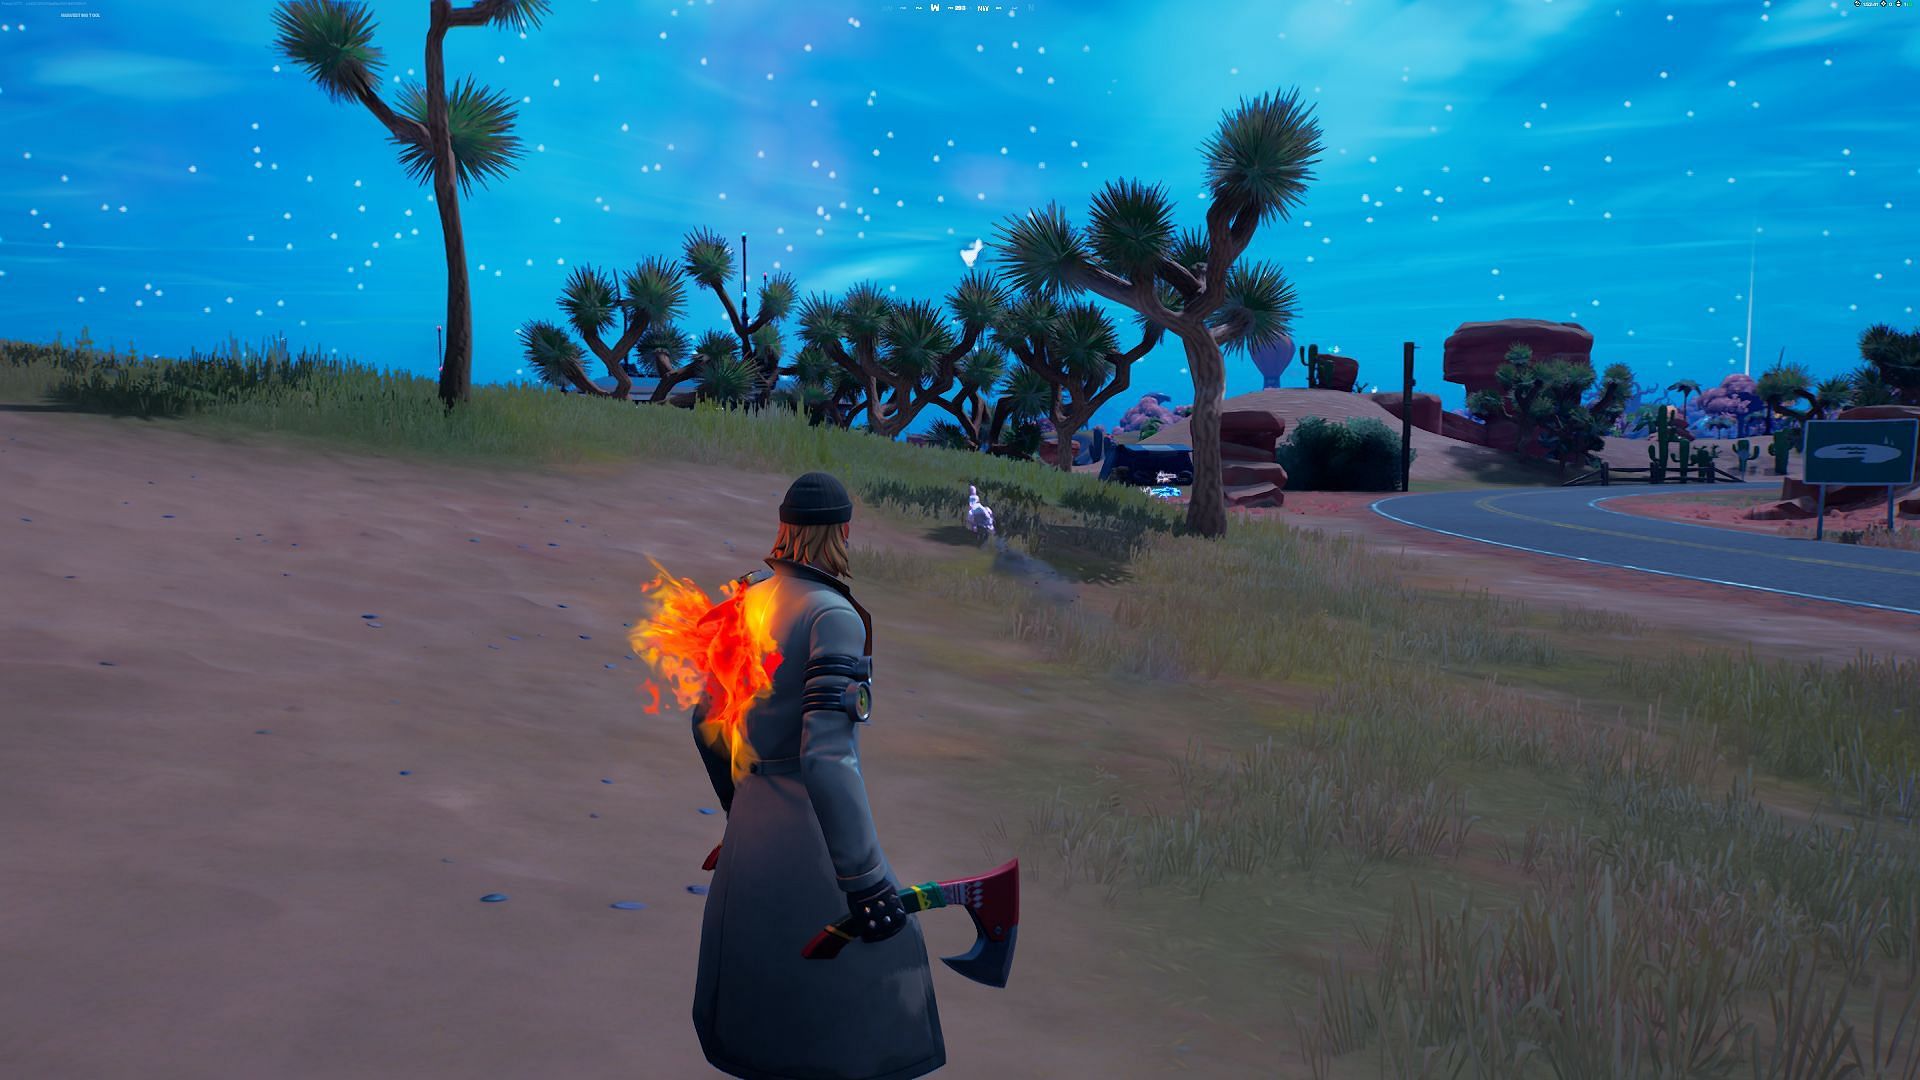 The chicken was just too fast to catch (Image via Epic Games/Fortnite)